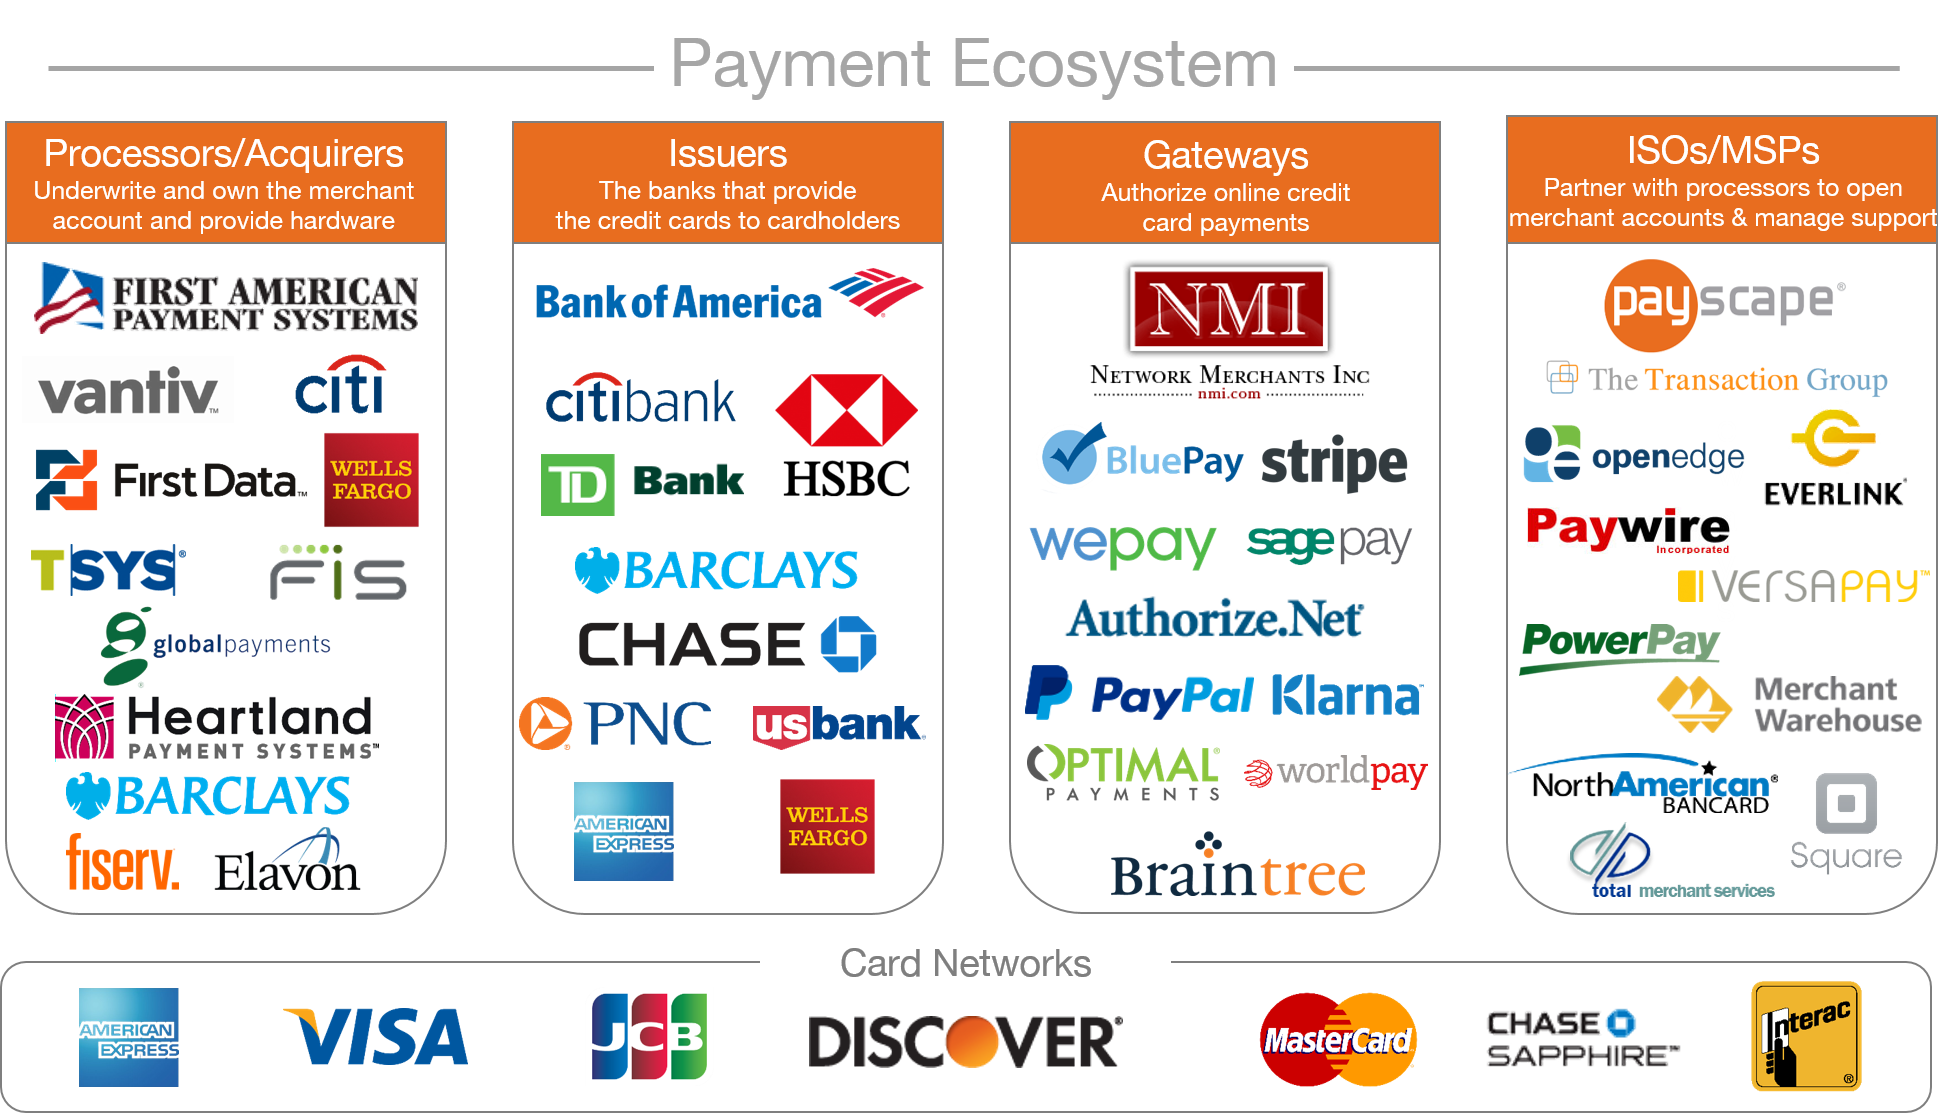 Payment Ecosystem 2015 1 ?width=2100&height=1194&name=Payment Ecosystem 2015 1 